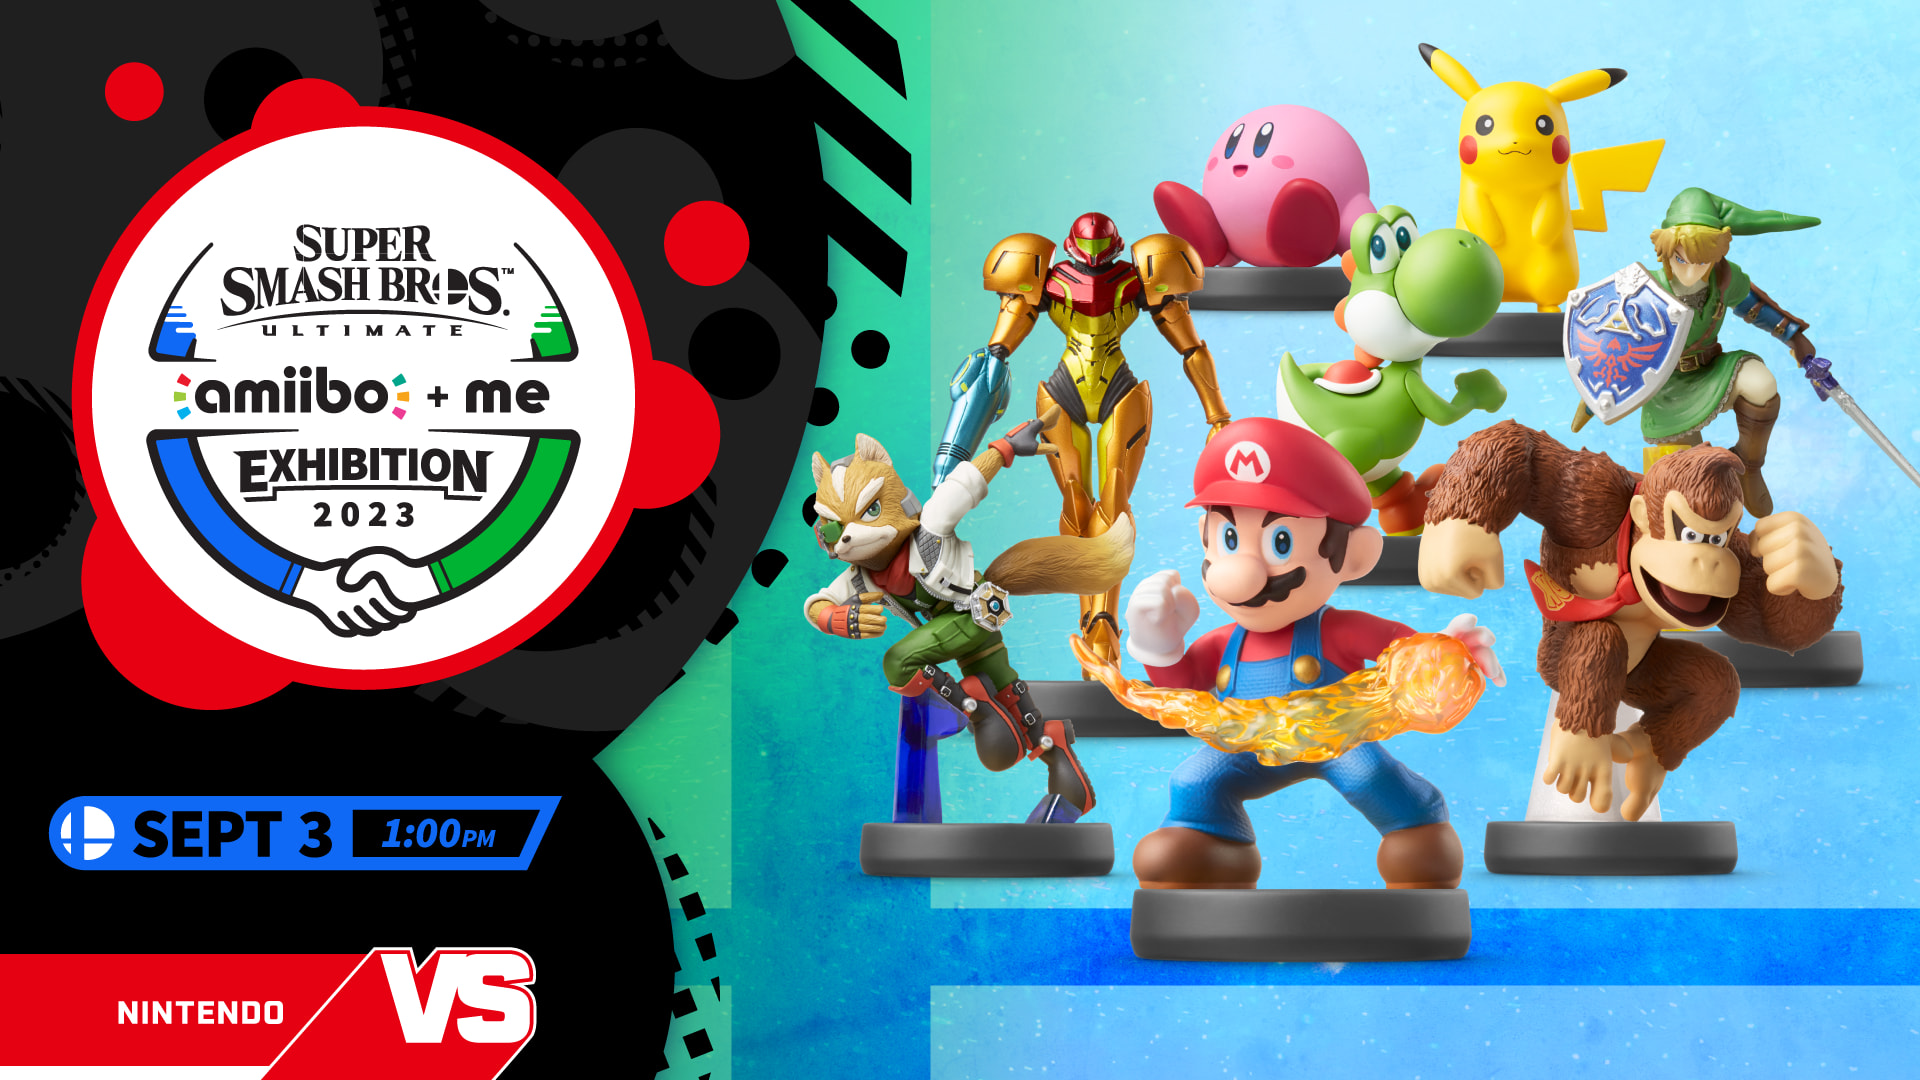 A selection of compatible amiibo figures, including Mario, Donkey Kong, Fox McCloud, Link, and others.